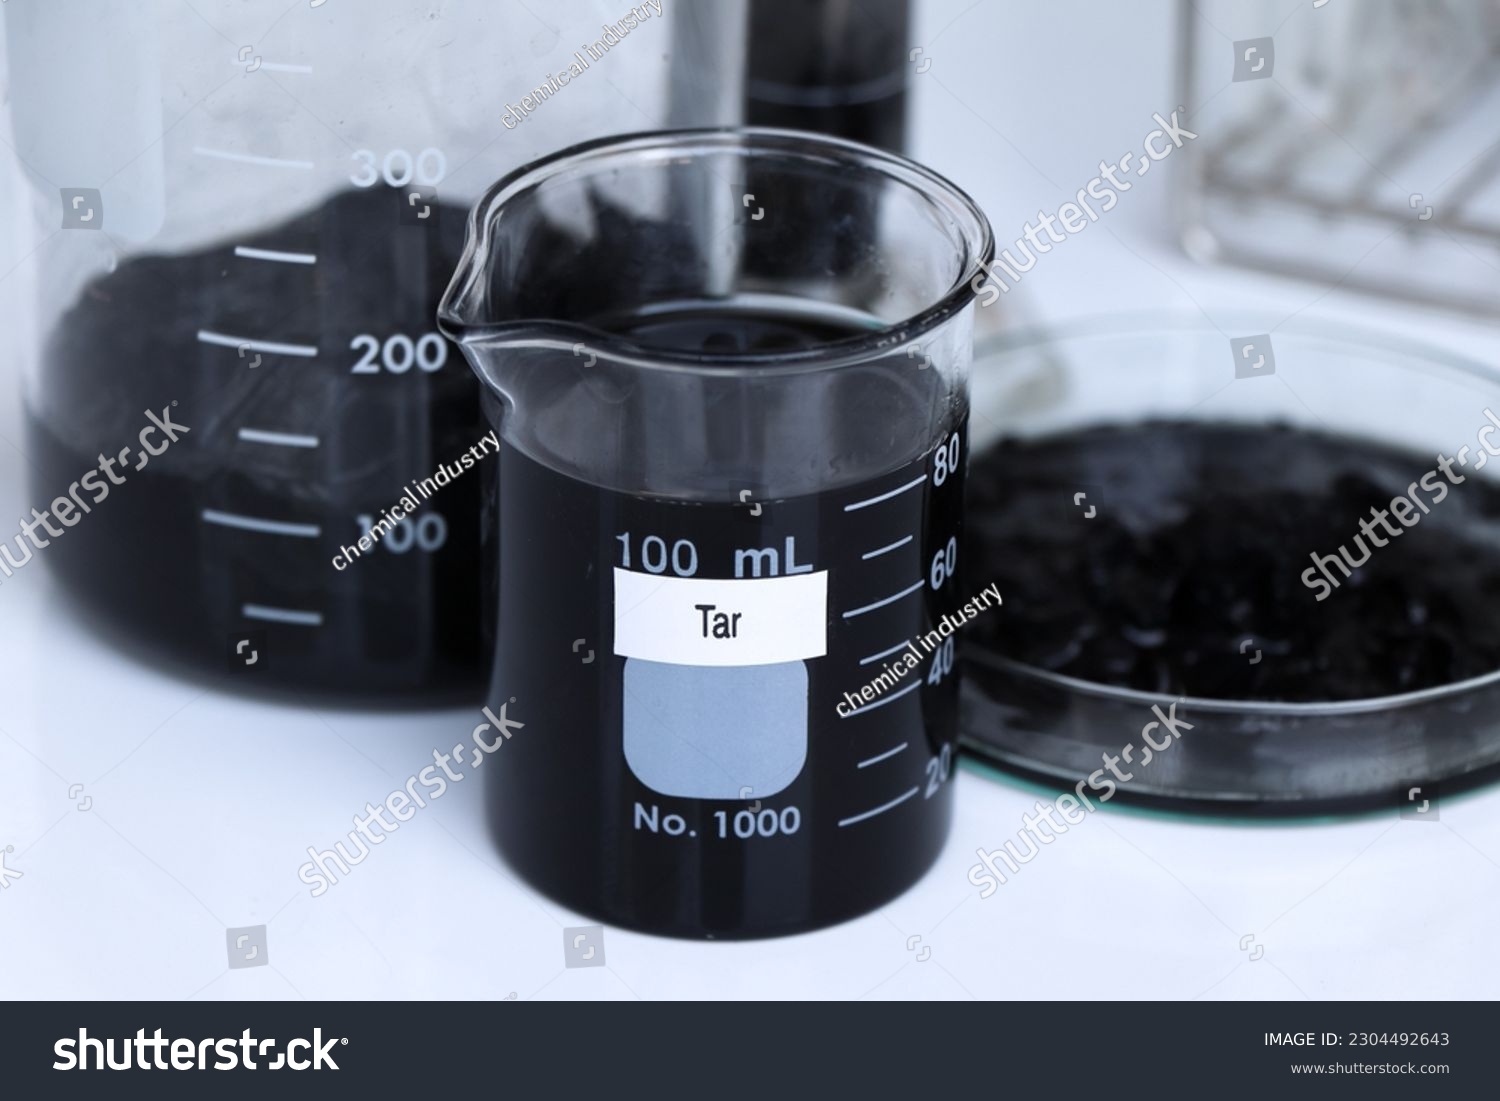 Tar in container, Laboratory Quality Testing Concepts, Scientific experiments for industry #2304492643